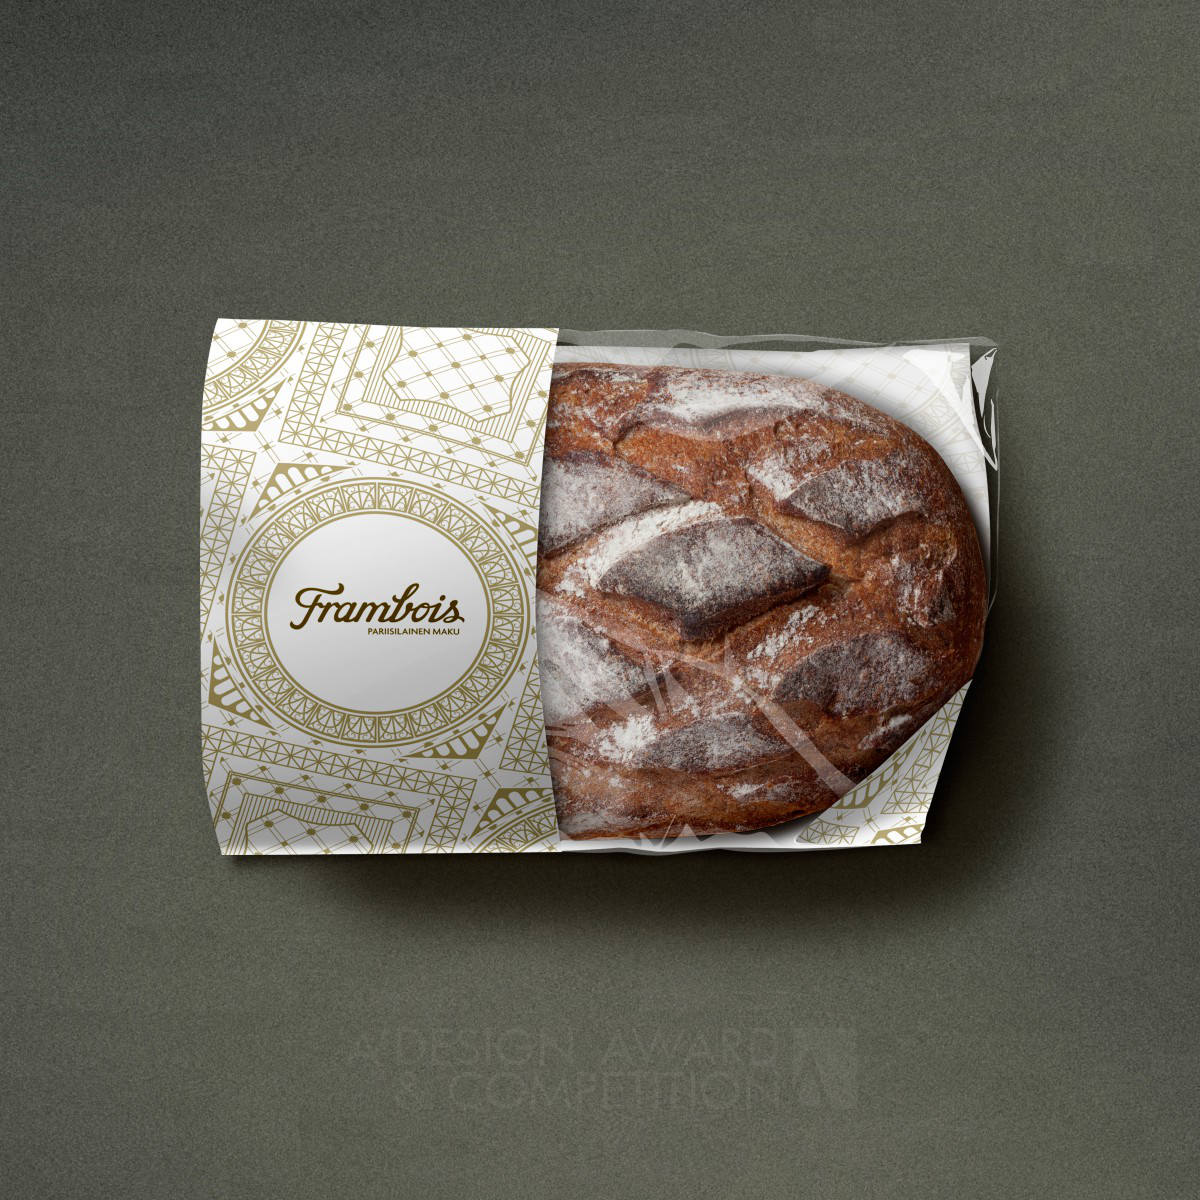 Frambois Bread  Brand and Packaging Design Excellence by Packlab